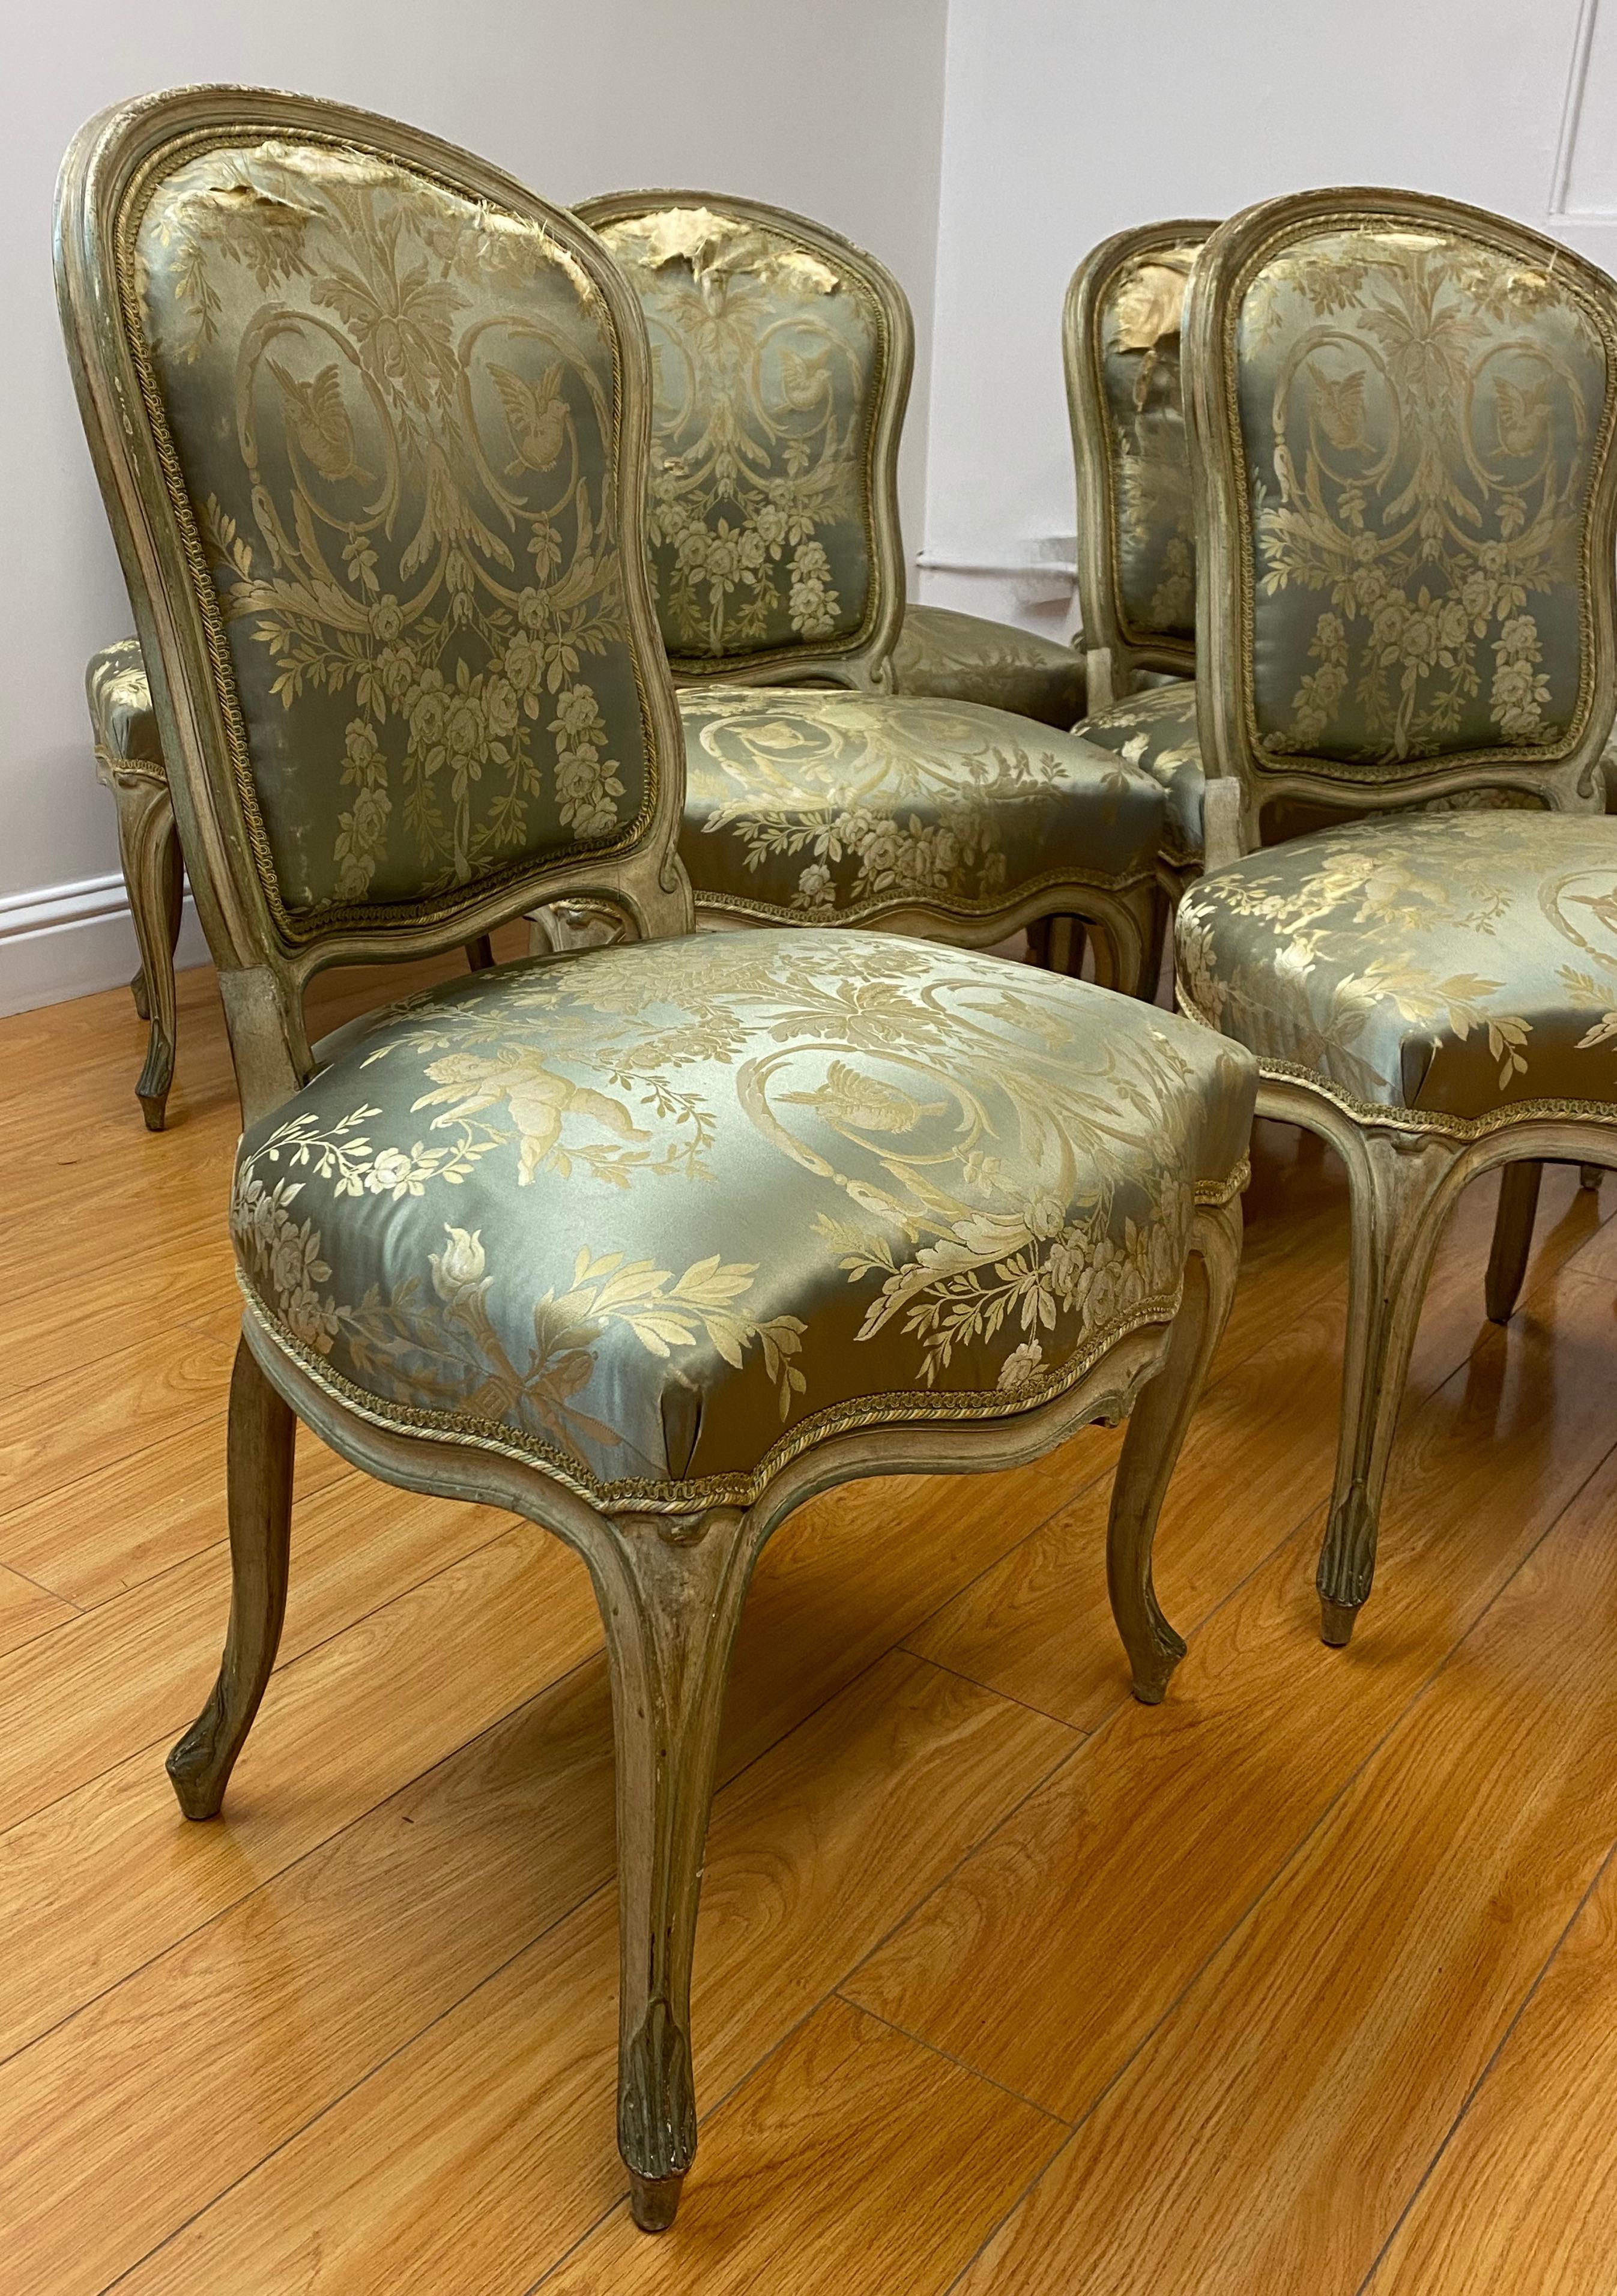 Eight early 20th century French side chairs for restoration (French & Co., NYC)

Outstanding set of eight French side chairs

Late 19th to early 20th century

The provenance of the chairs are shown on the label on the bottom, and were